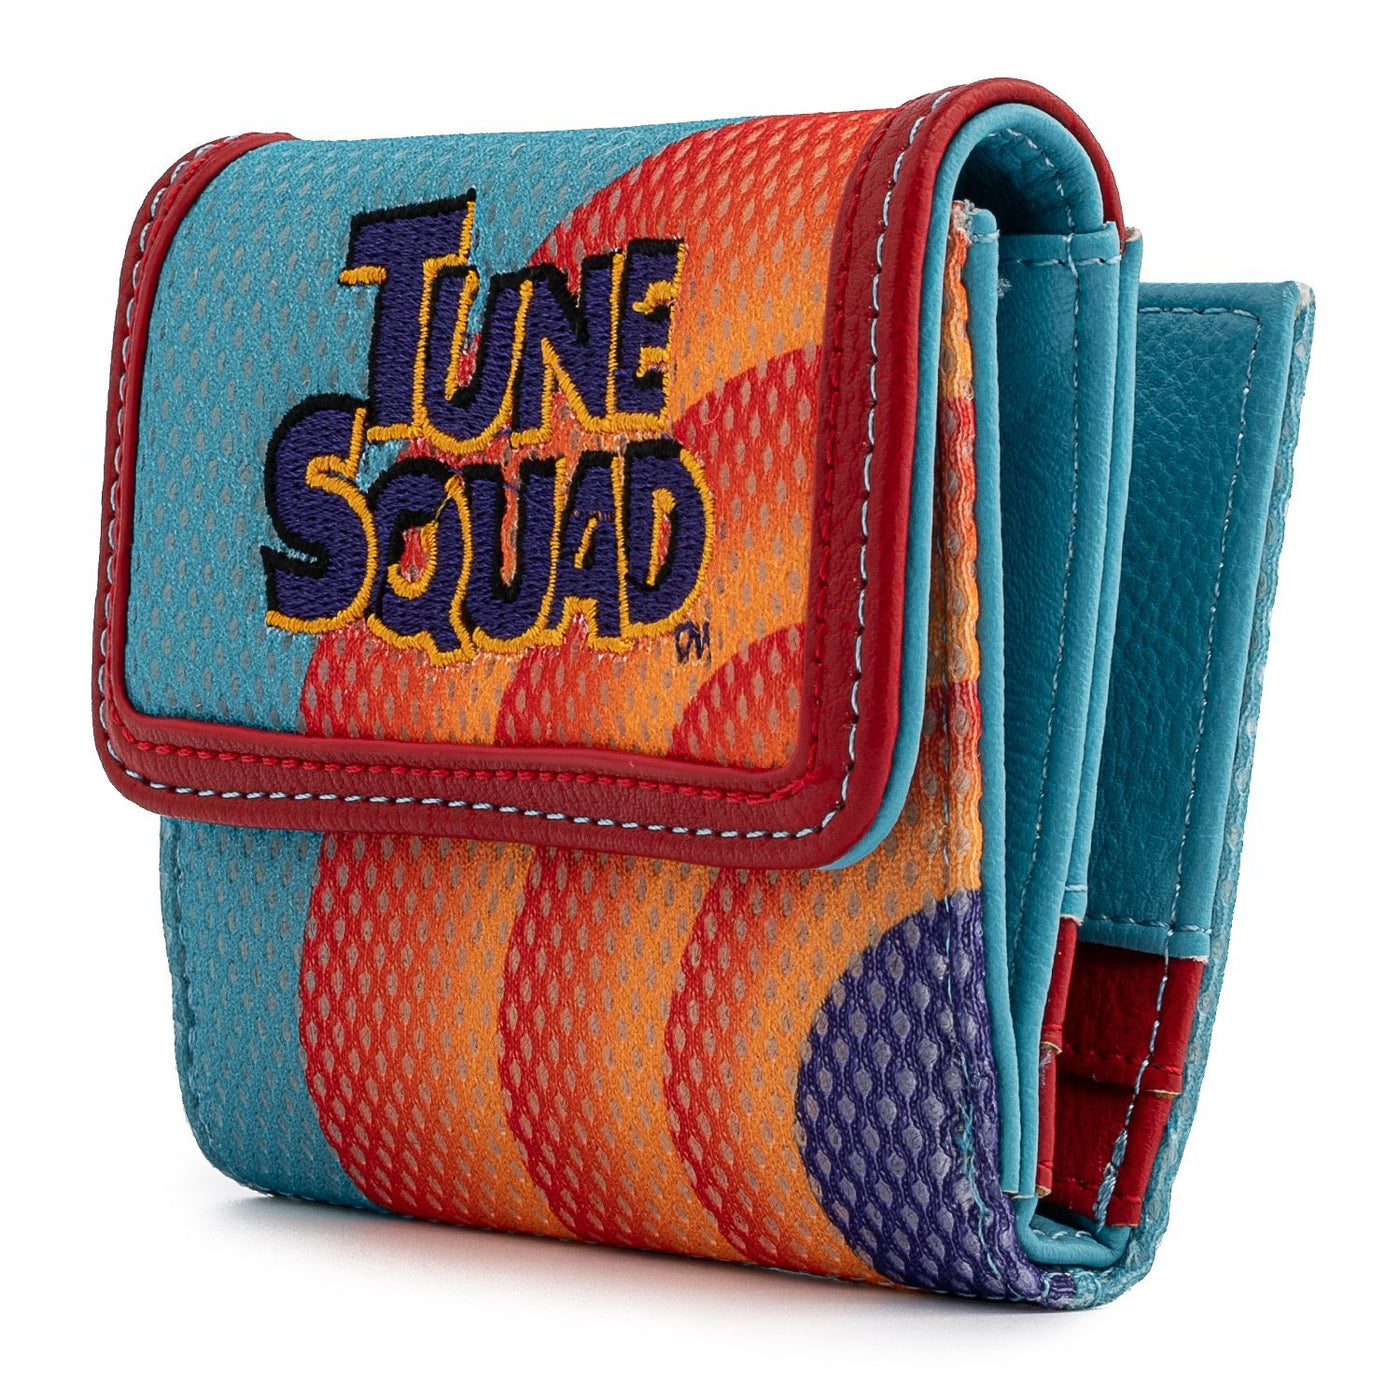 Loungefly Space Jam Tune Squad Bugs Wallet